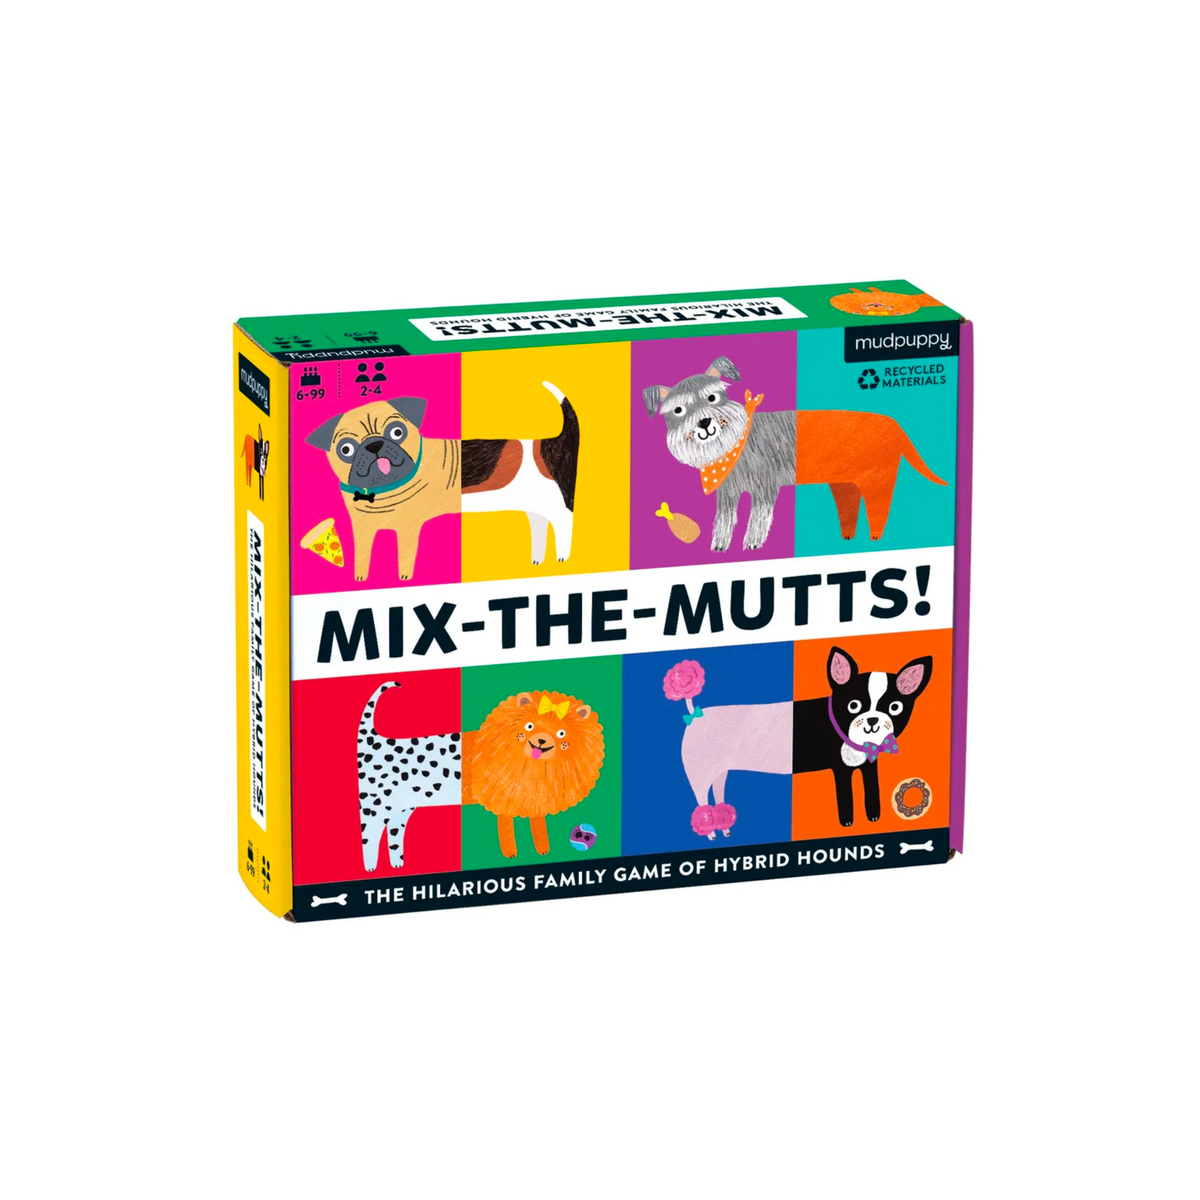 Mix-the-Mutts! Game